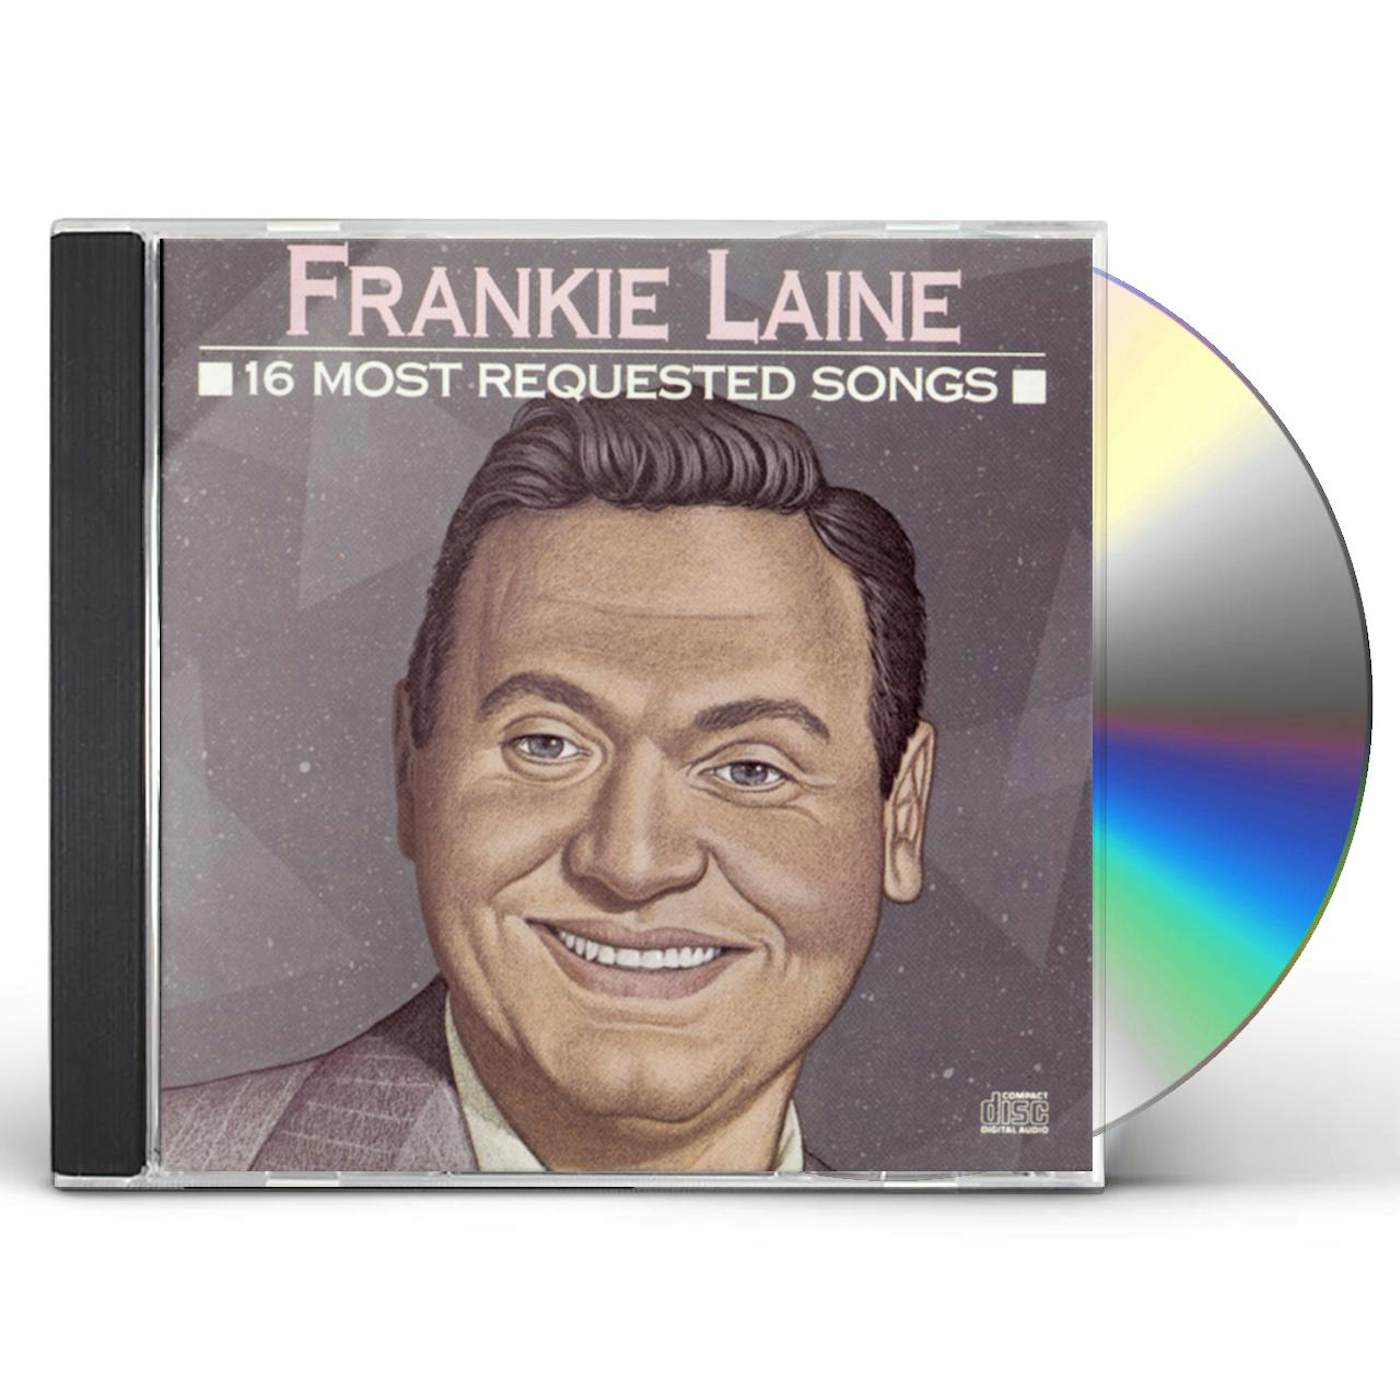 Frankie Laine 16 MOST REQUESTED SONGS CD